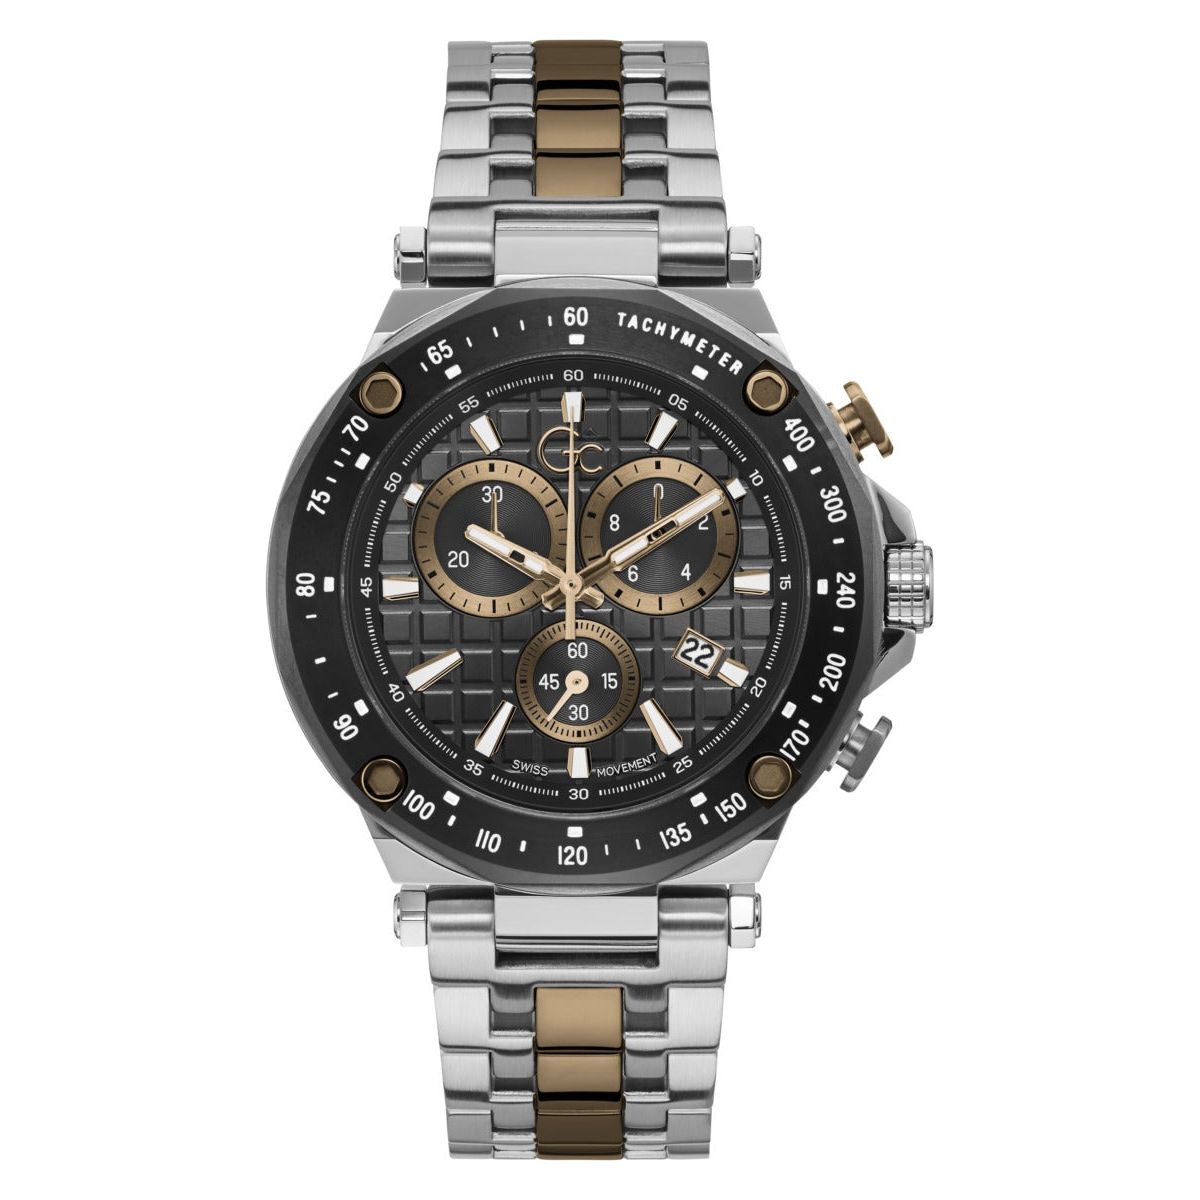 GUESS COLLECTION GUESS COLLECTION WATCHES Mod. Y81002G5MF WATCHES guess-collection-watches-mod-y81002g5mf